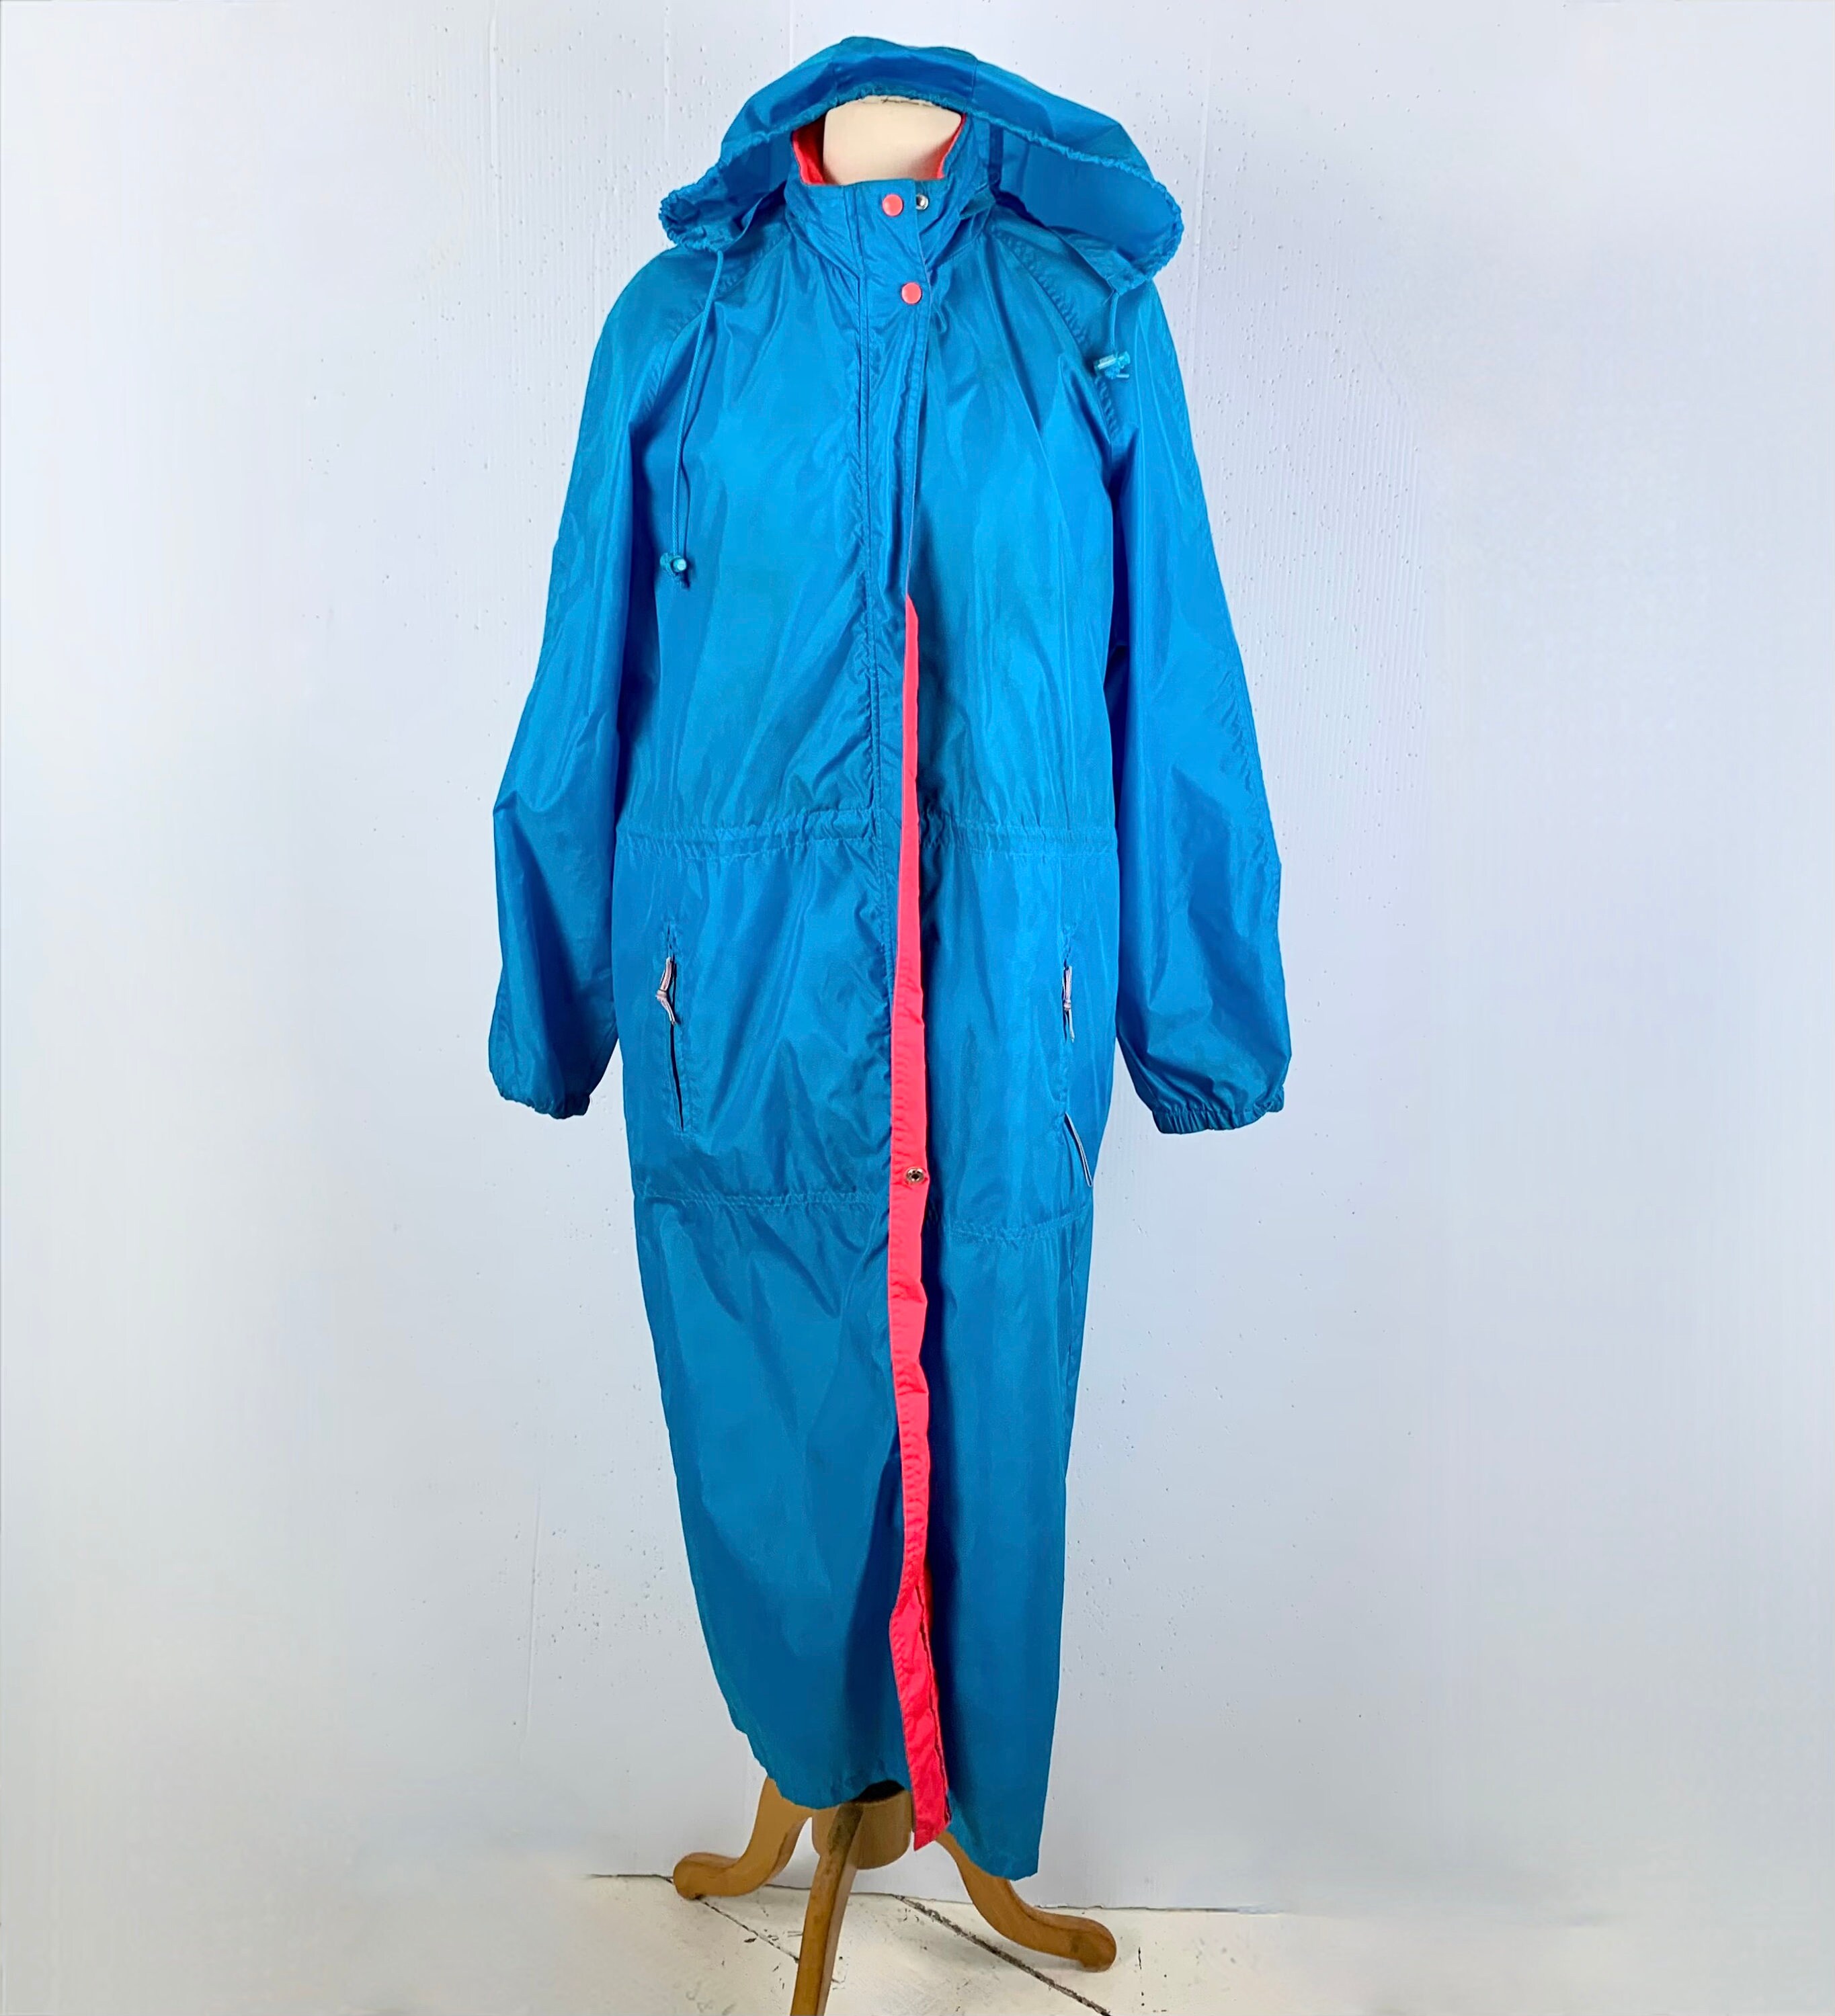 Vintage Y2K Woolrich Maxi Raincoat Medium Large Turquoise with Hot Pink  Trim Hidden Hood Lightweight Nylon Ripstop Cape Back Excellent